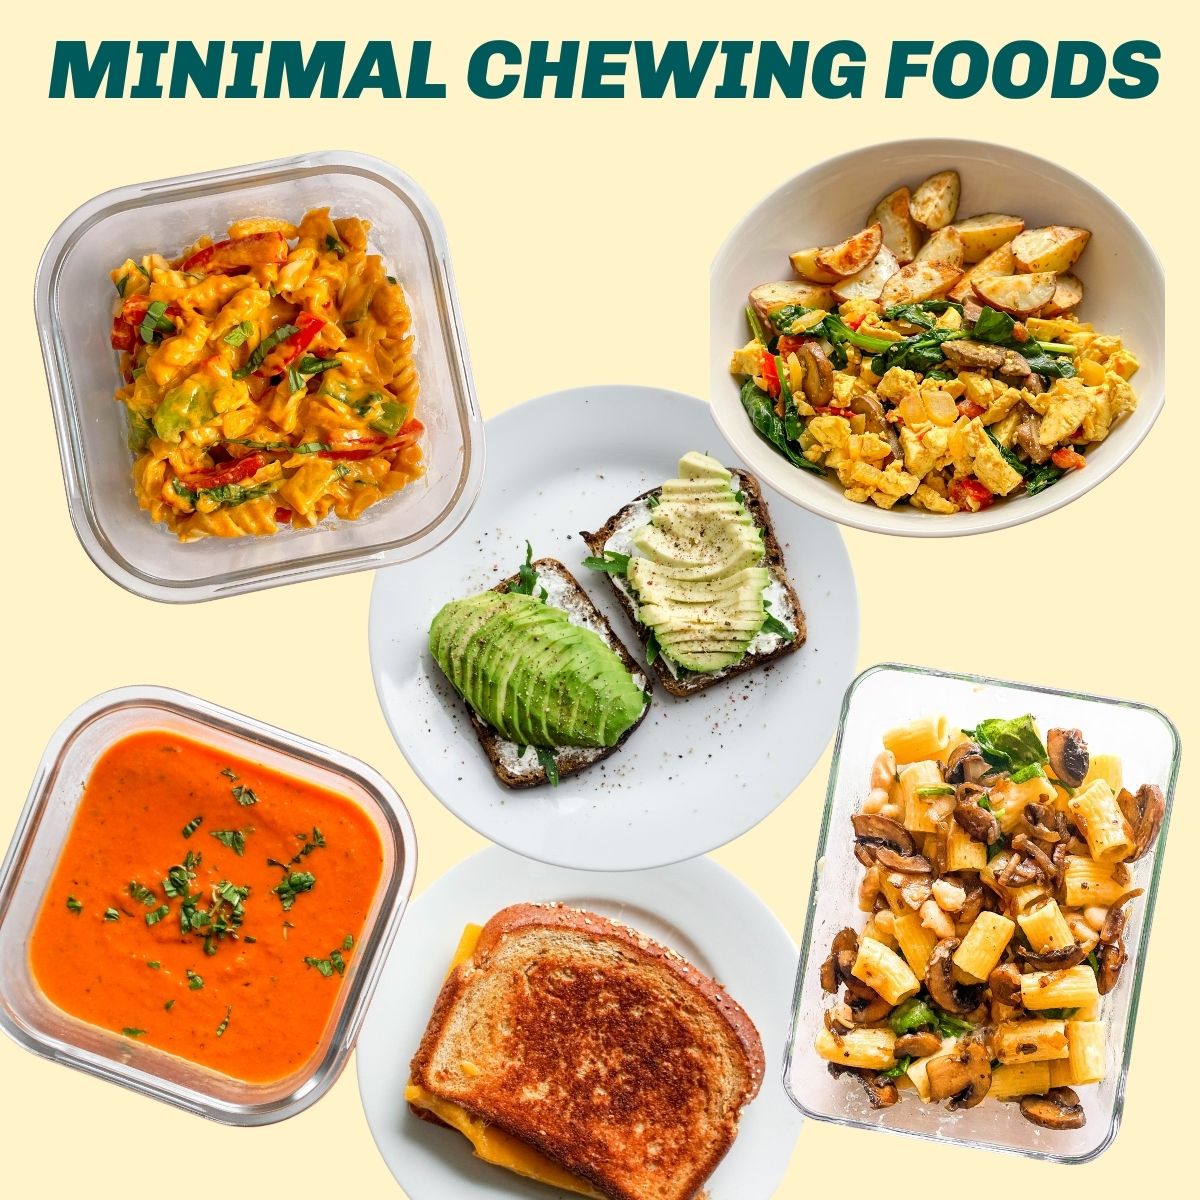 Six different pictures of food on a light yellow background. The foods include mac and cheese, soup, grilled cheese, avocado toast, a tofu scramble, and mushroom pasta.